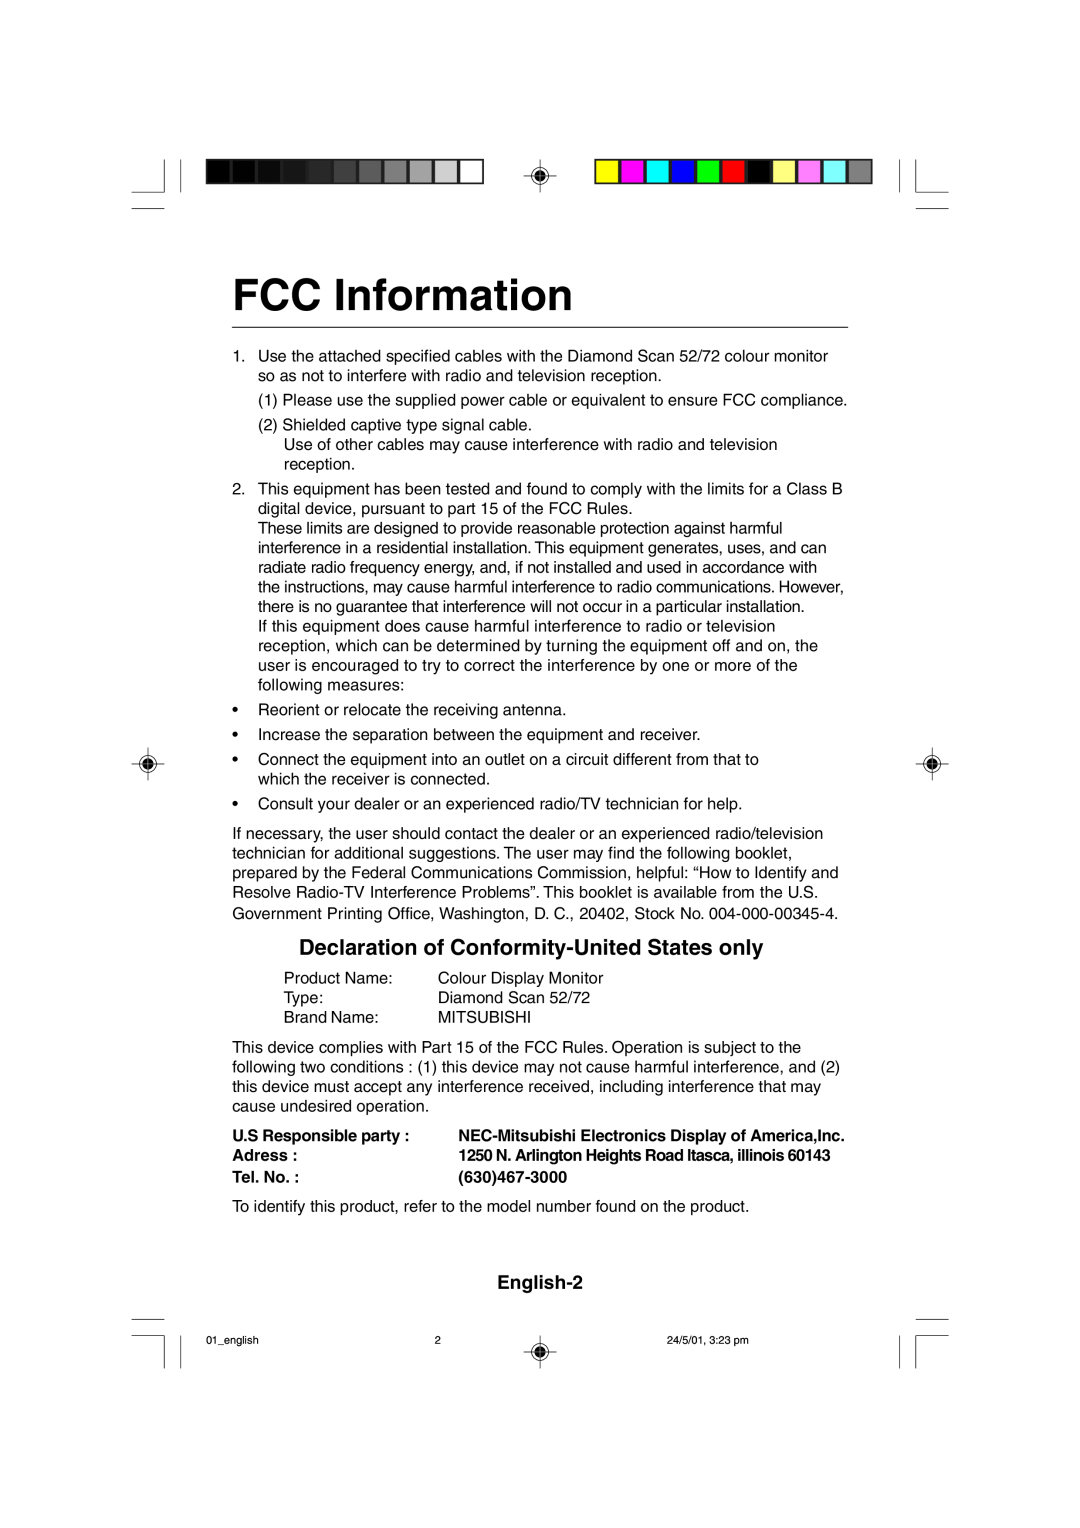 Mitsubishi Electronics M557 FCC Information, Declaration of Conformity-United States only, U.S Responsible party, Adress 